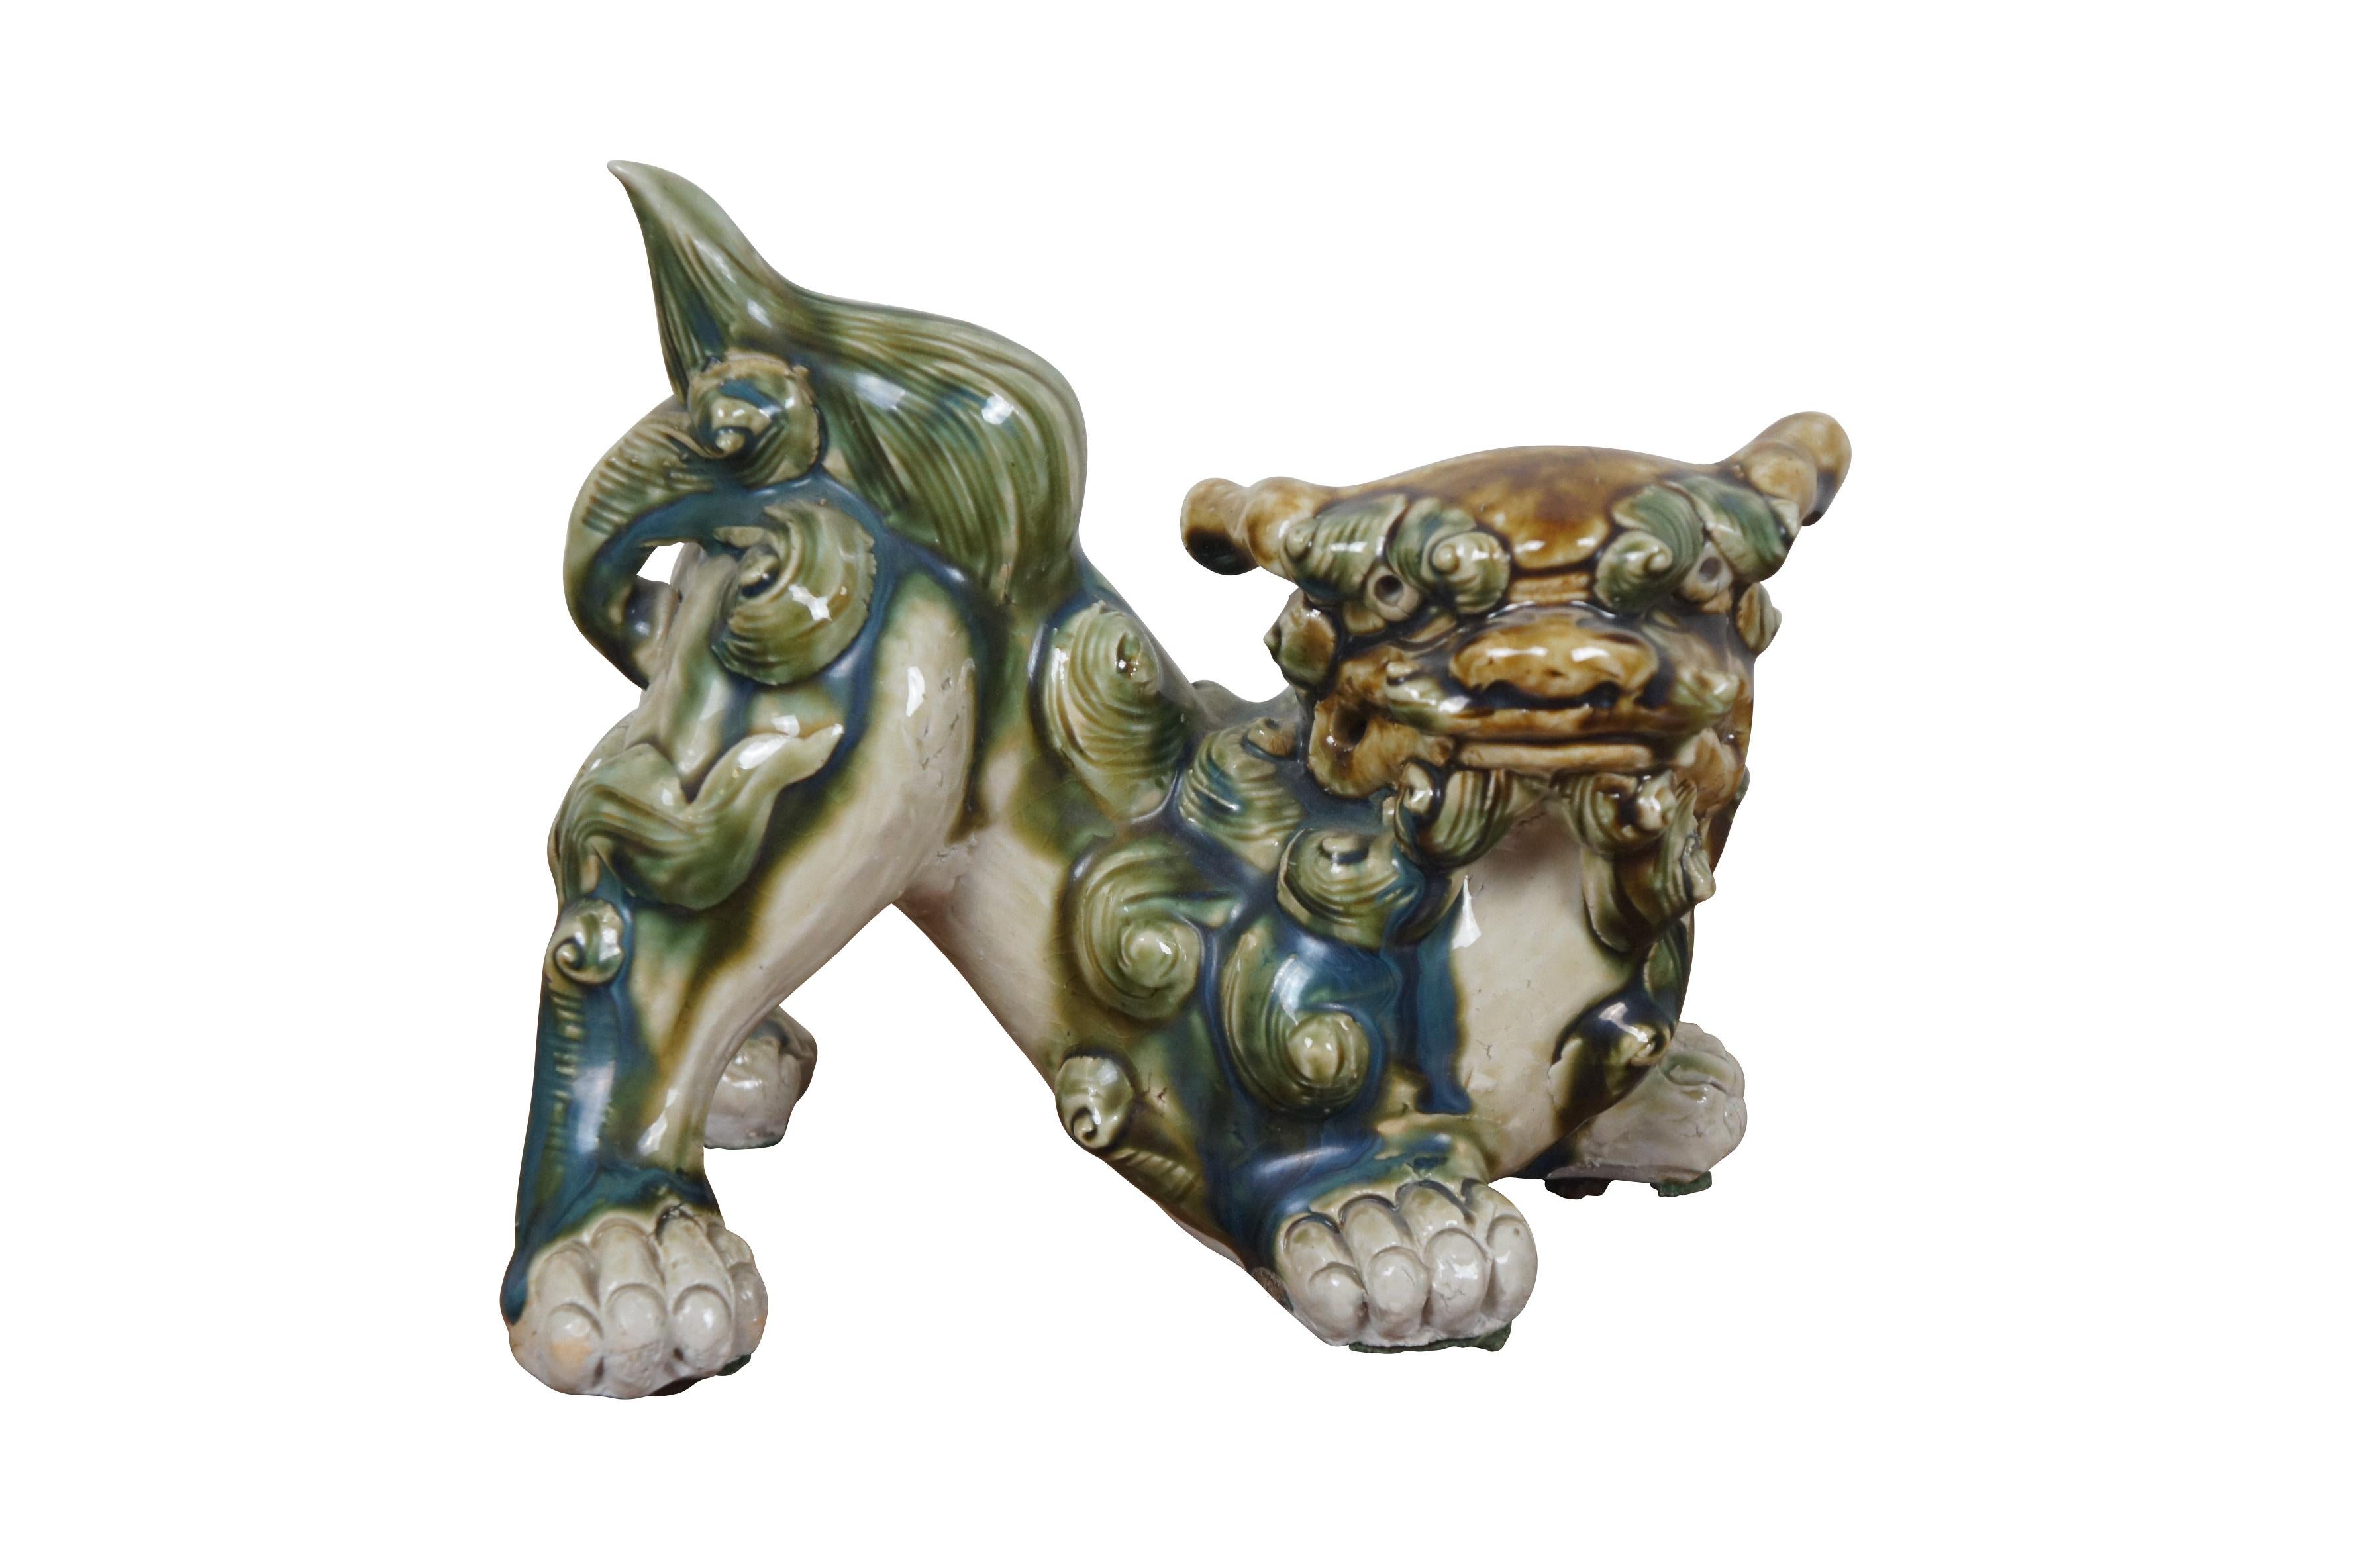 Pair of 20th century shishi / guardian lion / foo dog figurines. Ceramic glazed in green, teal and brown. Incised with Okinawa on rear leg.

